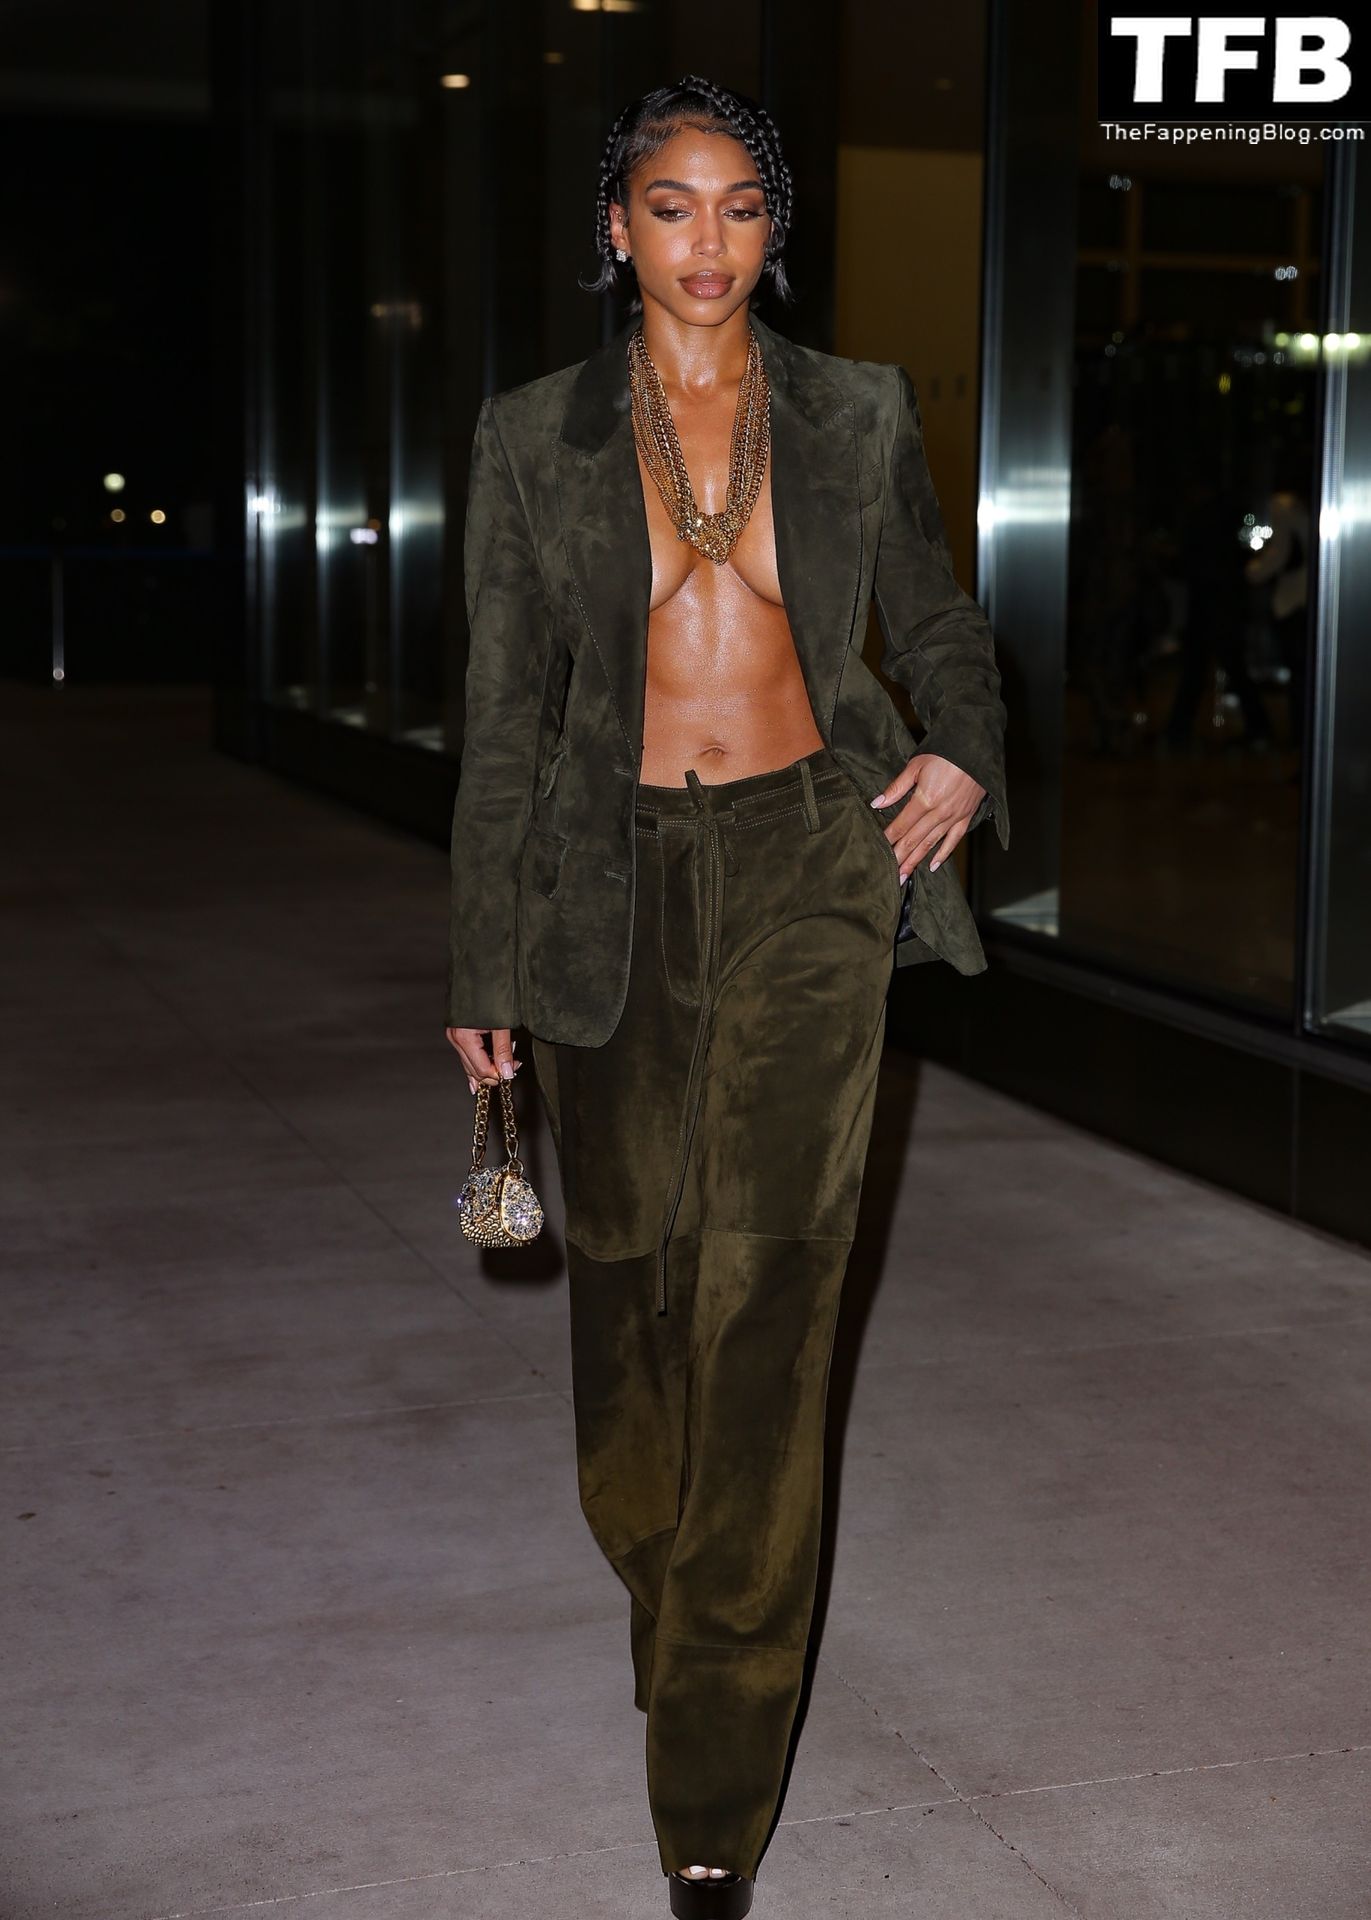 Lori Harvey Sexy The Fappening Blog 11 - Lori Harvey Shows Off Her Tits at the Tom Ford Fashion Show (38 Photos)